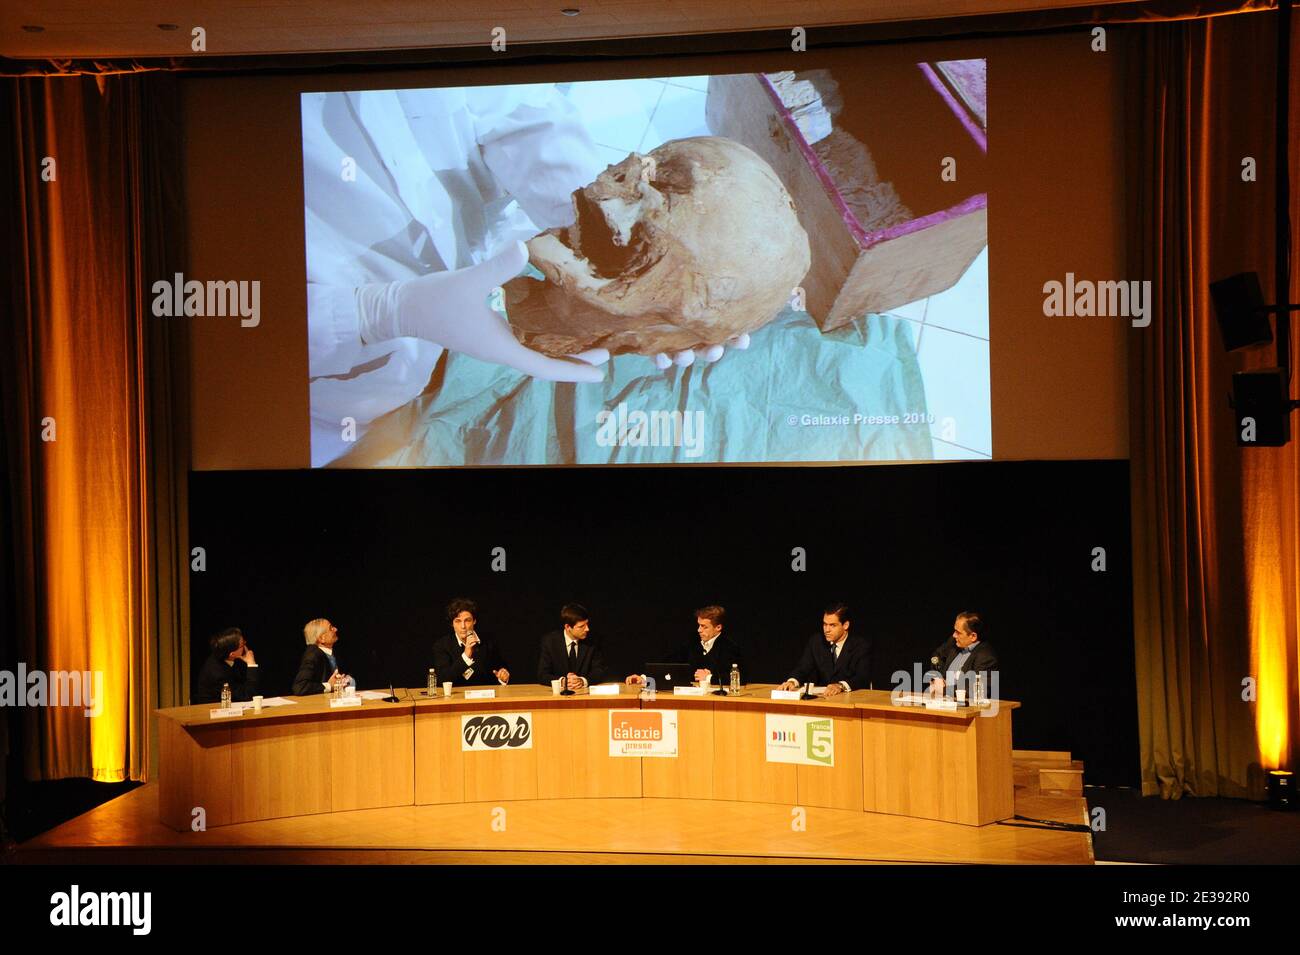 French doctor Philippe Charlier among other scientists said they have identified an embalmed head as belonging to King Henri IV of France, who was assassinated in 1610 at the age of 57 during a press conference held at Grand Palais in Paris, France on December 16, 2010. The head was lost after revolutionaries ransacked the royal chapel at Saint Denis, near Paris, in 1793. A head, presumed to be that of Henri IV, has passed between private collectors since then. Photo by Nicolas Briquet/ABACAPRESS.COM Stock Photo